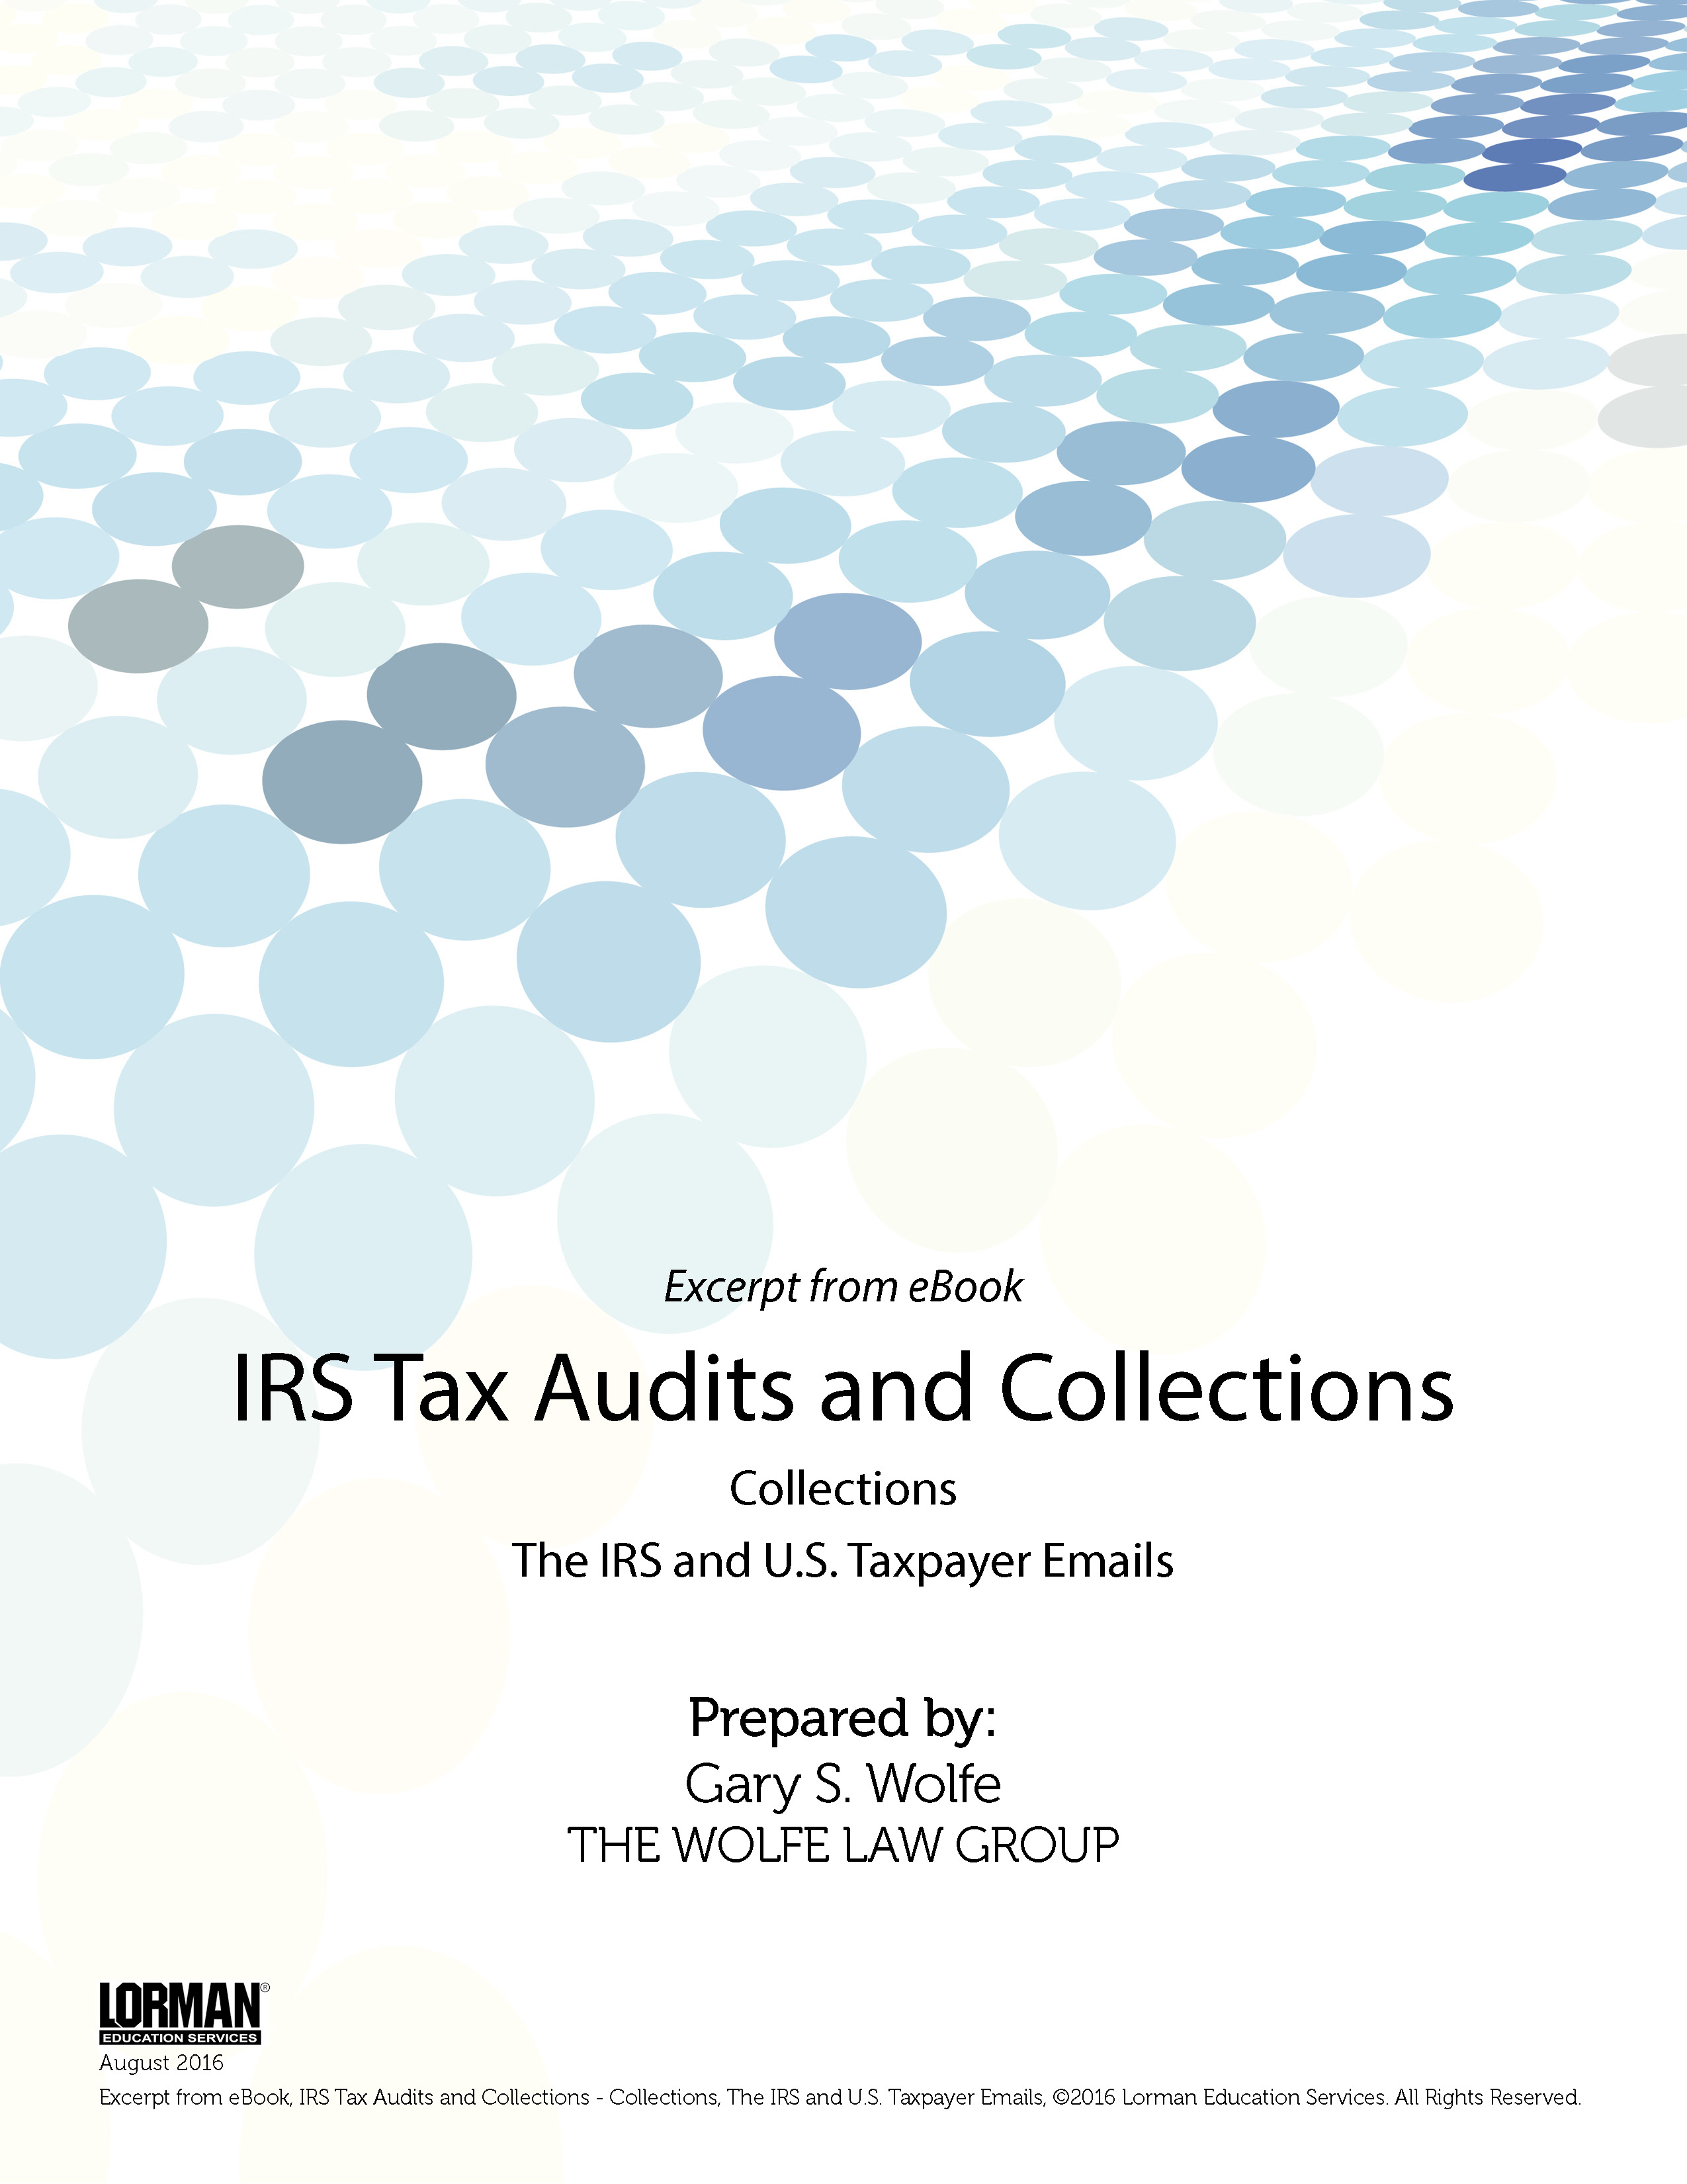 IRS Tax Audits and Collections: Collections, The IRS and U.S. Taxpayer Emails